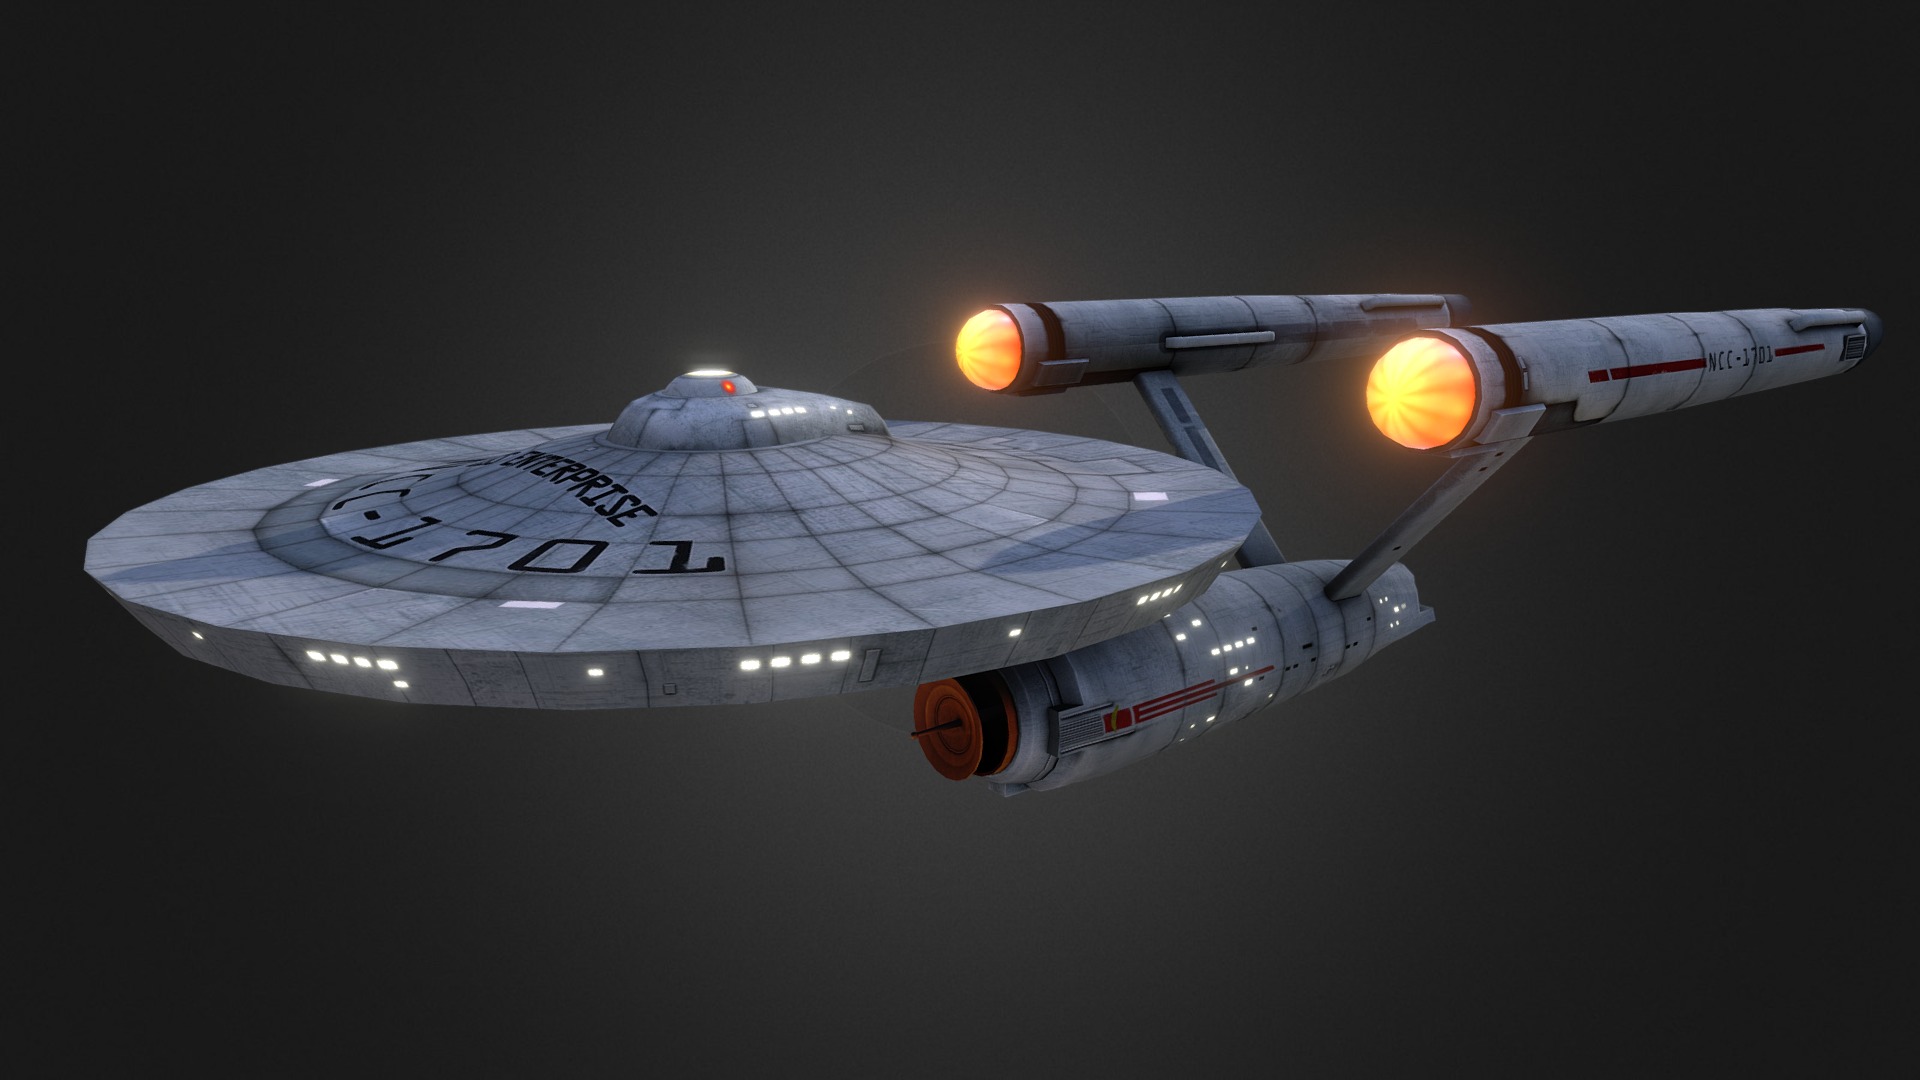 3D model Starship Enterprise - This is a 3D model of the Starship Enterprise. The 3D model is about a space shuttle with a light on top.